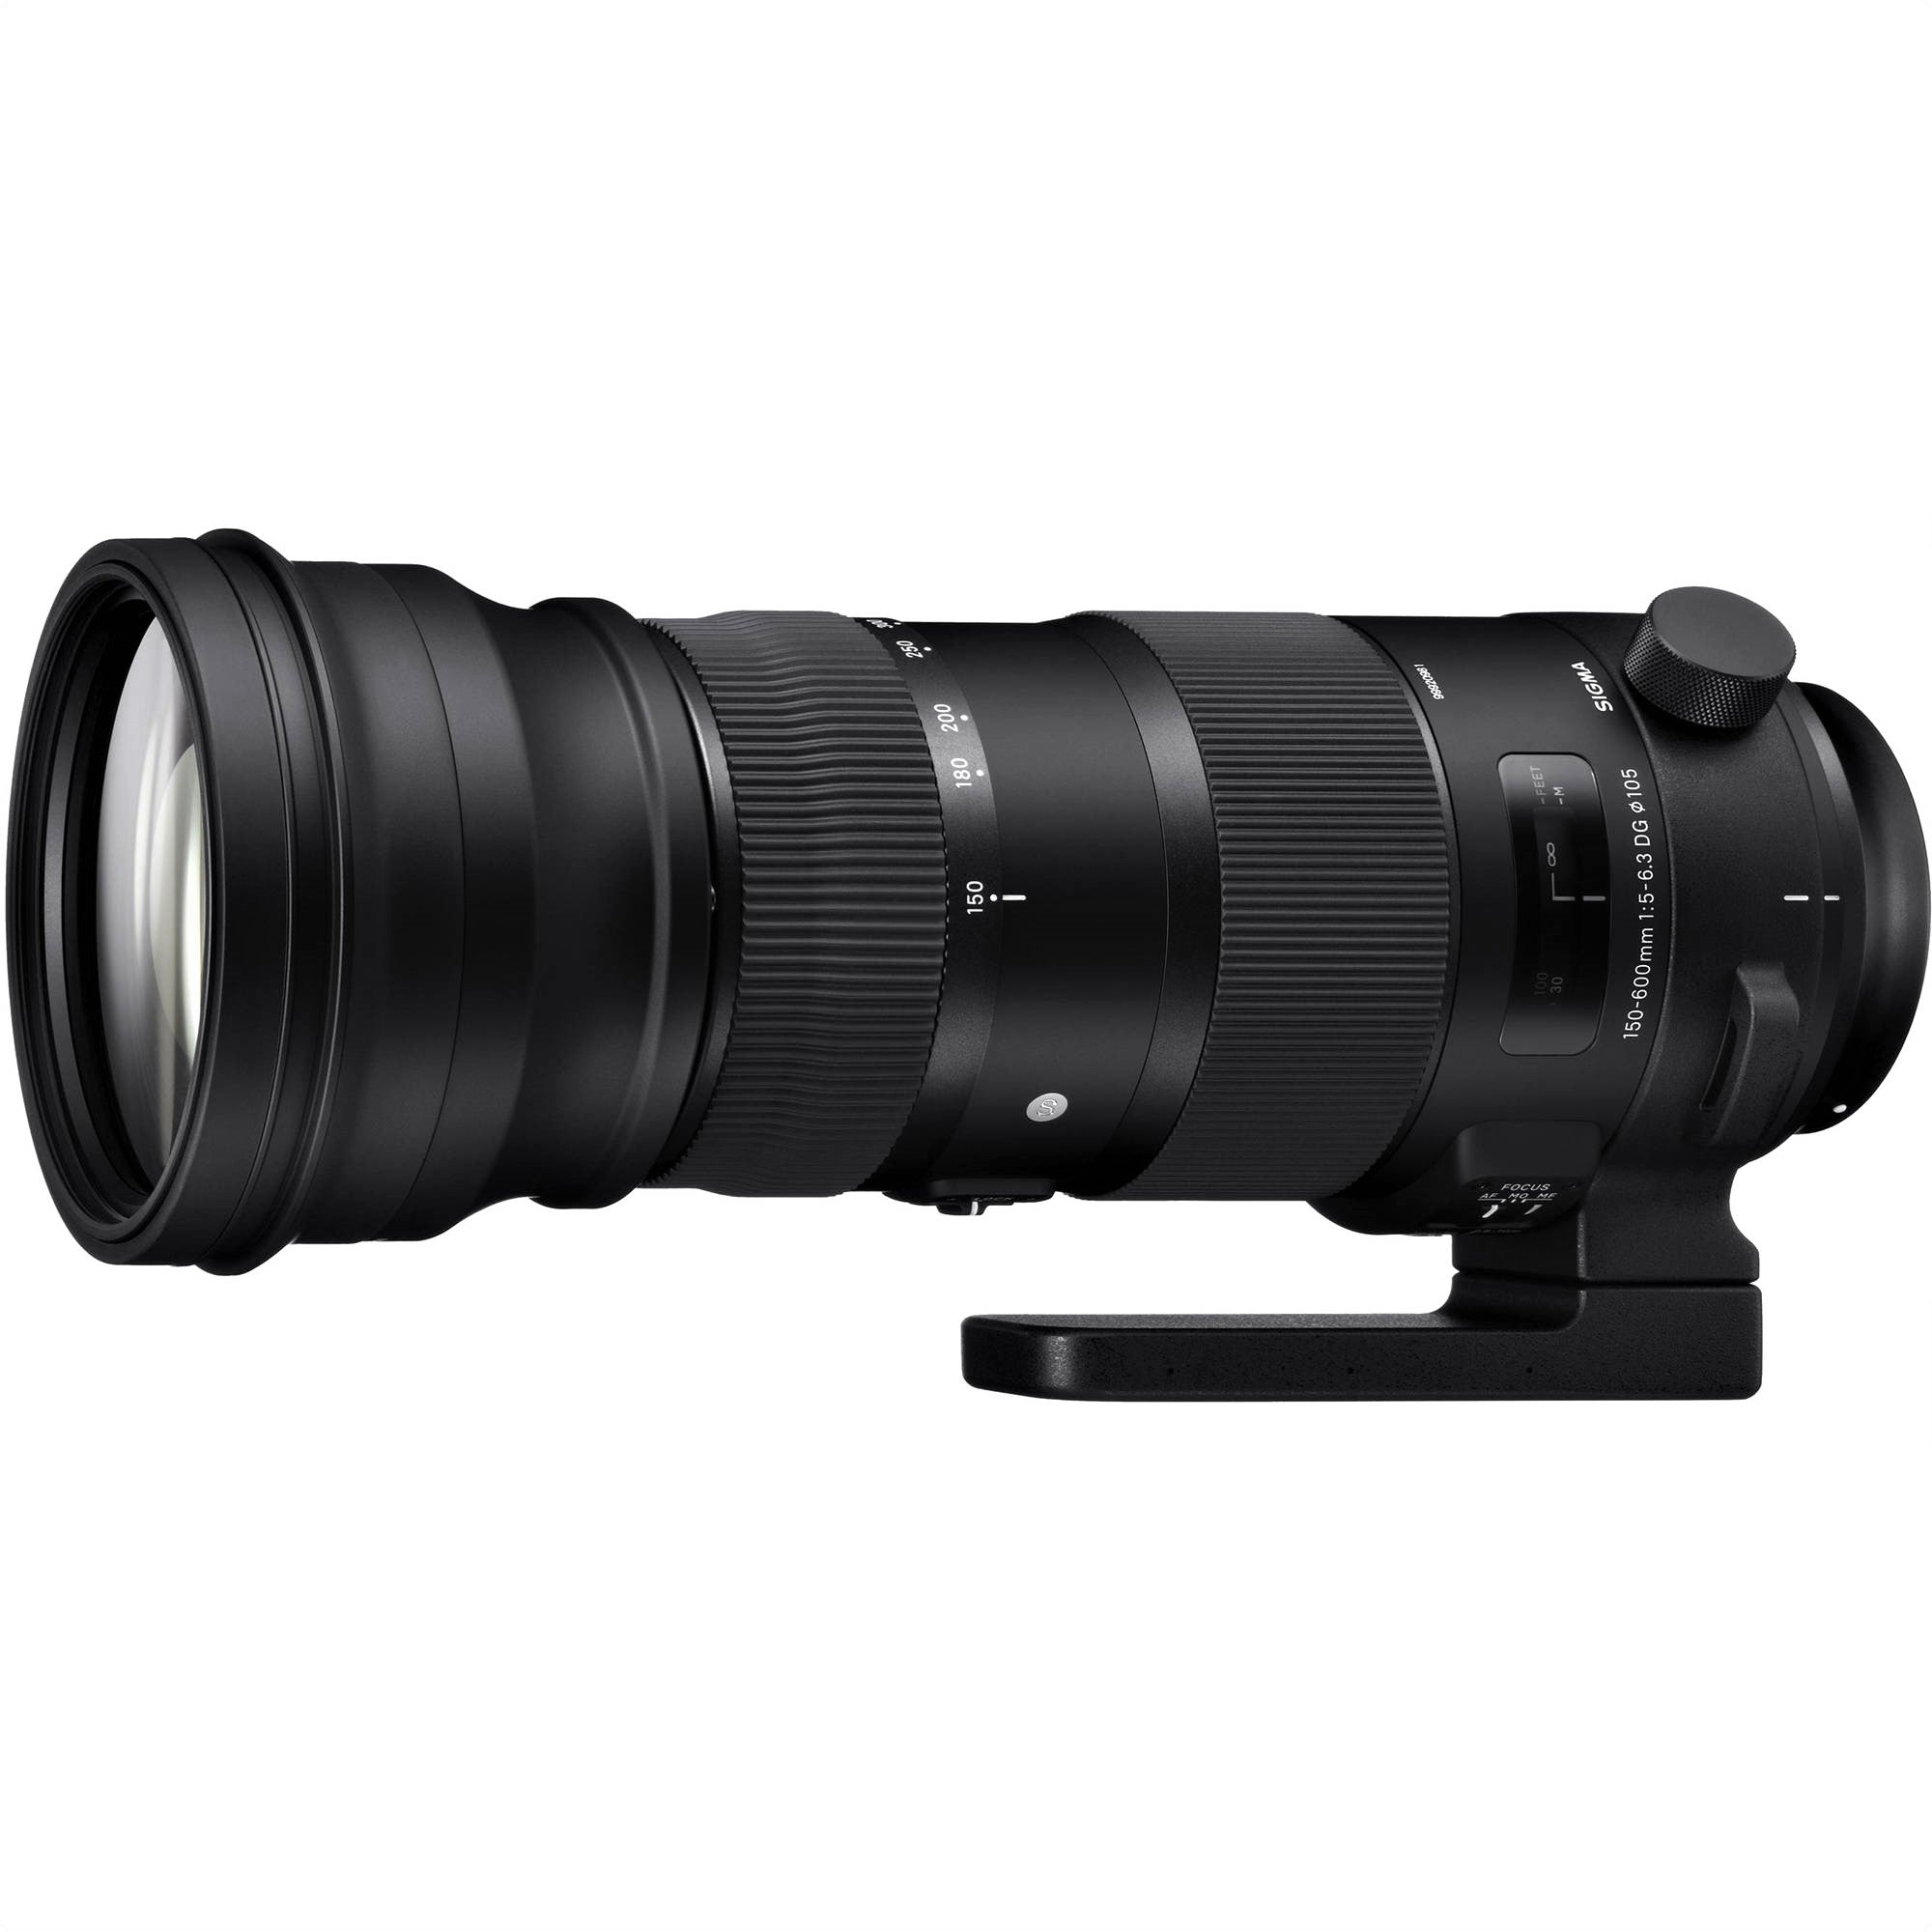 Sigma 150-600mm F5-6.3 DG OS HSM Sports Lens for Nikon F in a Side View